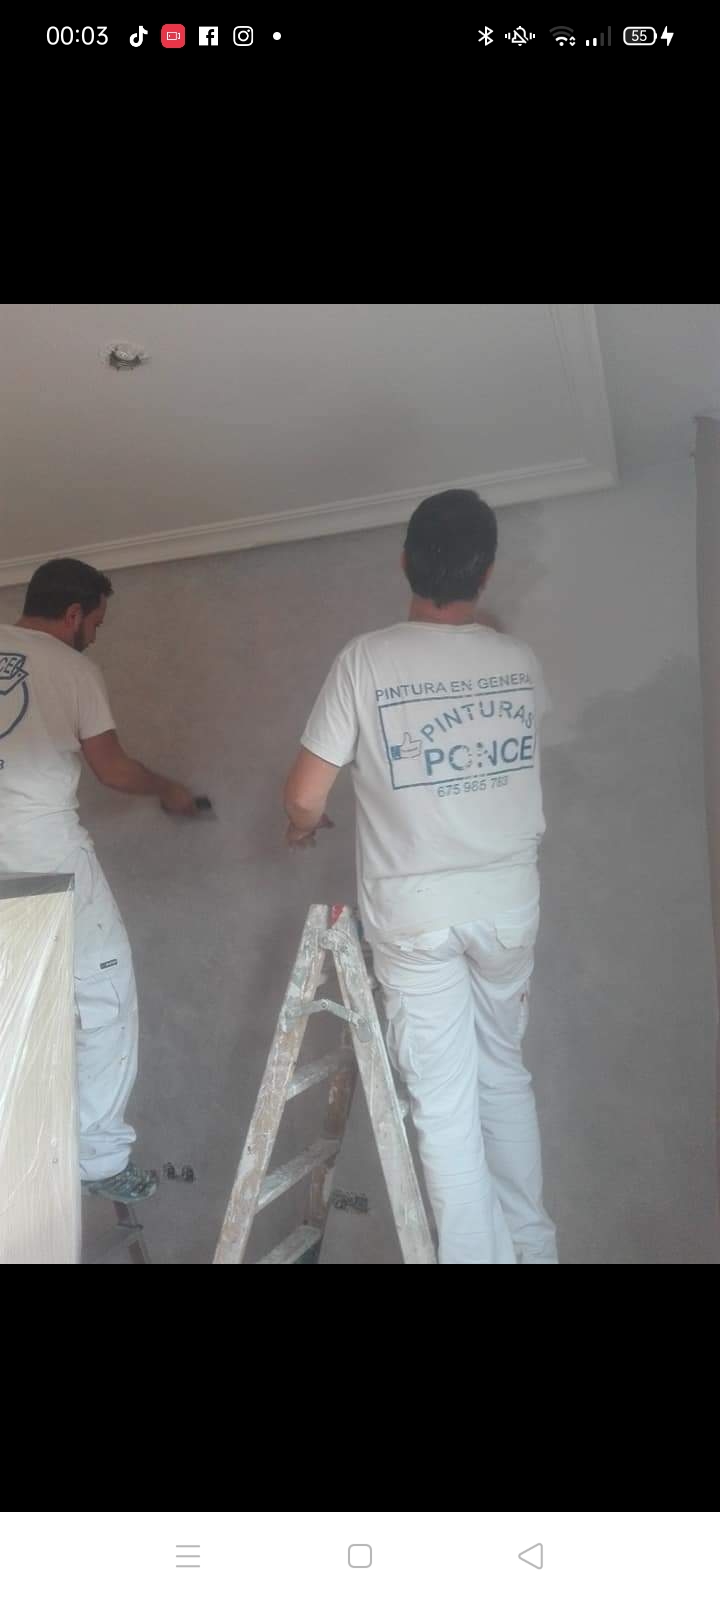 Images Pinturas Ponce